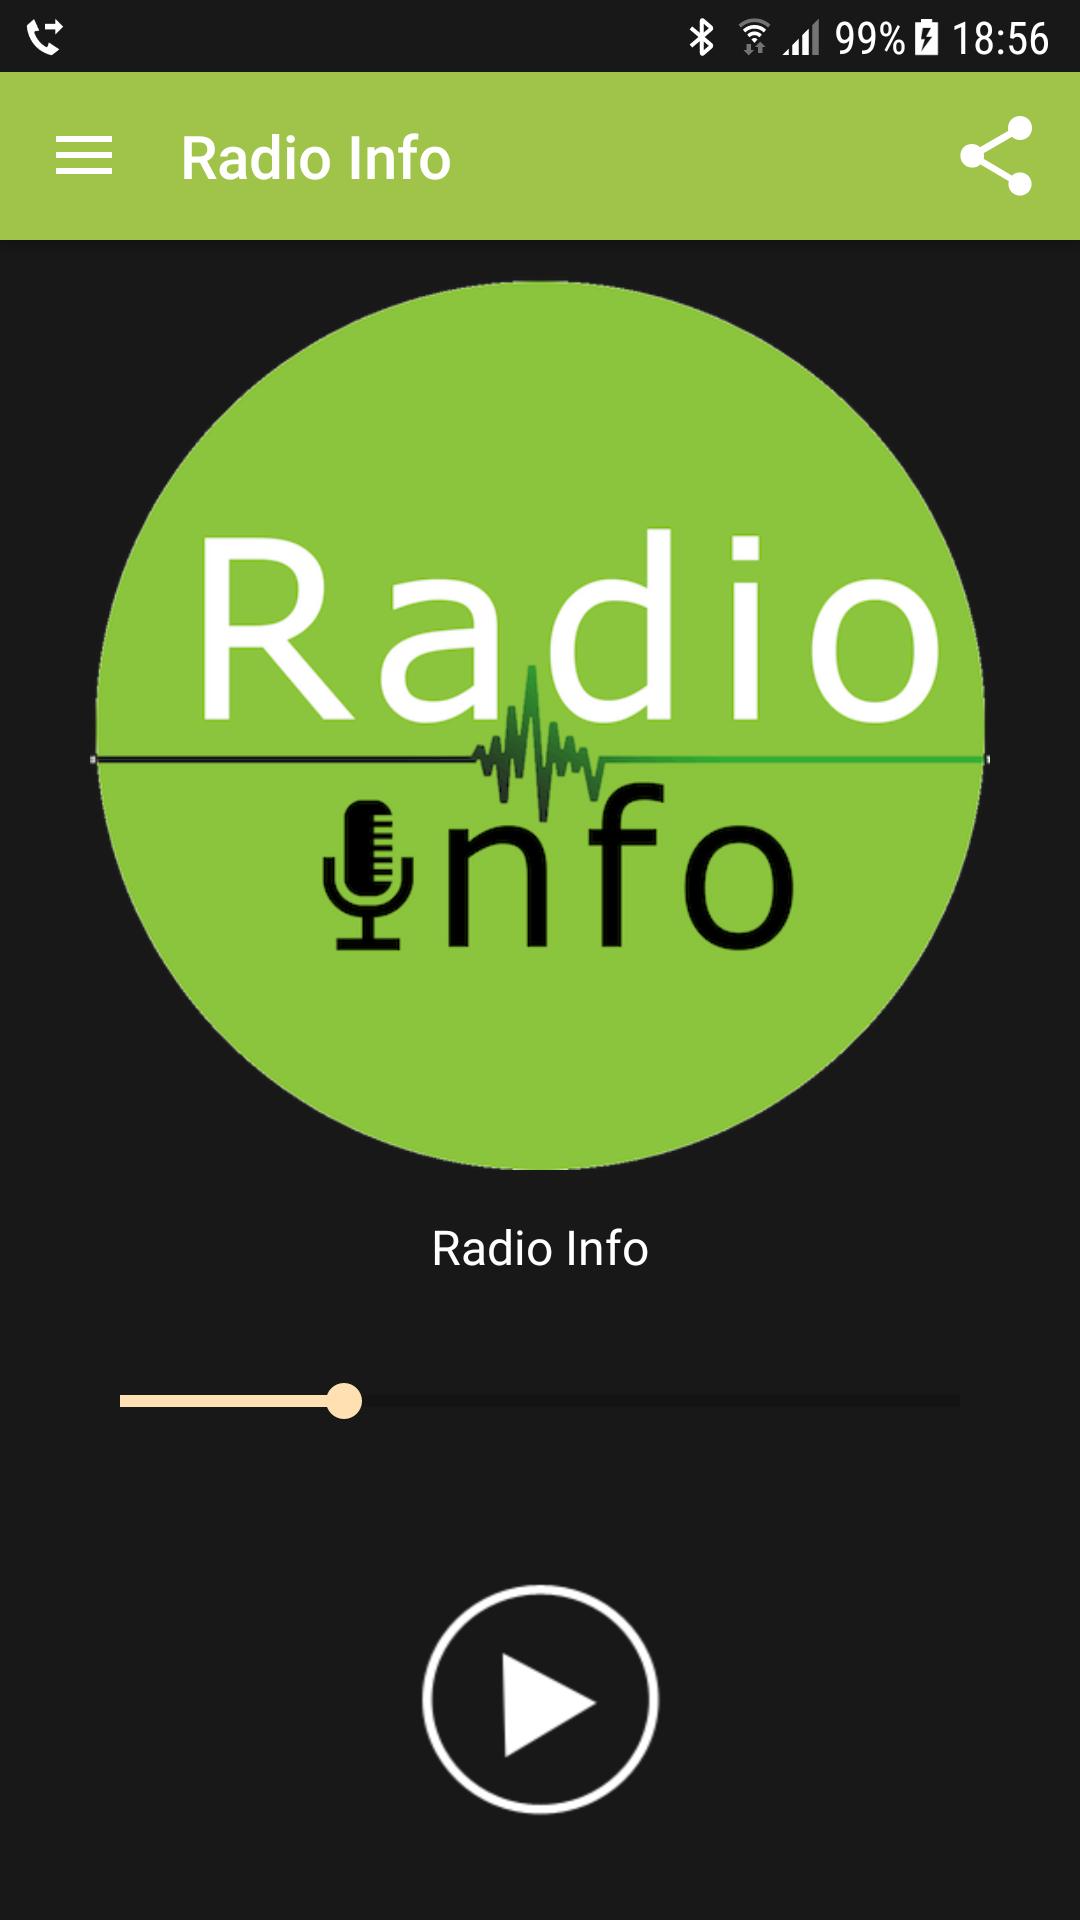 RADIO INFO for Android - APK Download